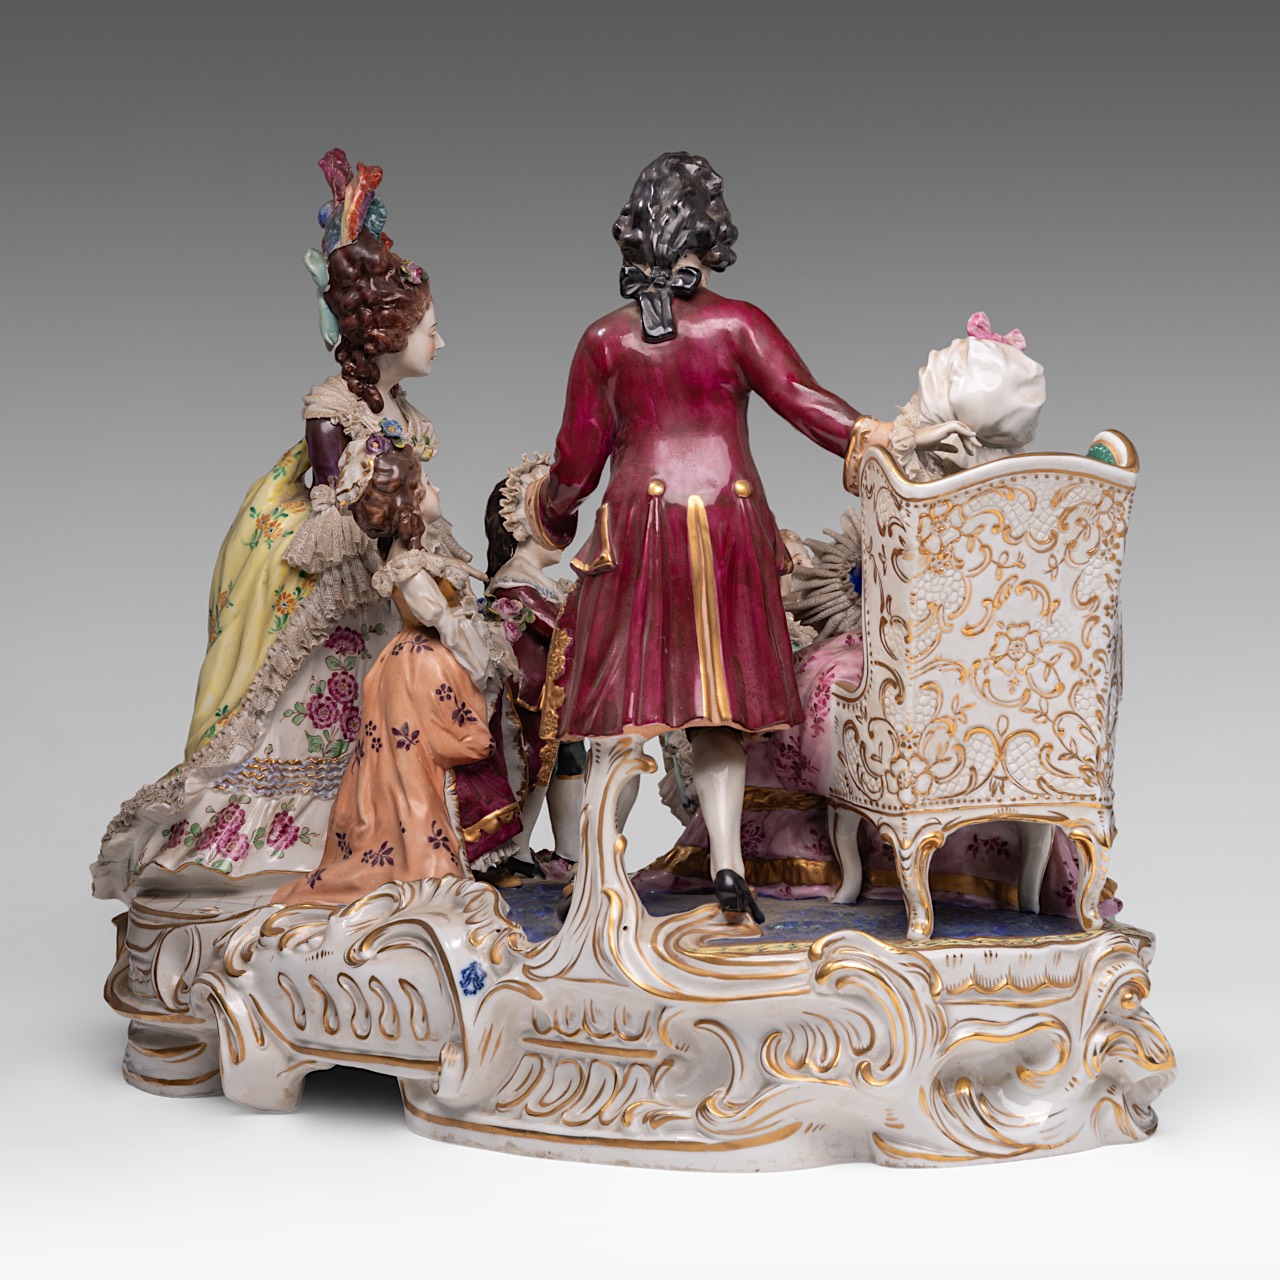 A large Saxony polychrome porcelain group depicting a gallant scene in a Rococo setting, H 40 - W 55 - Image 5 of 15